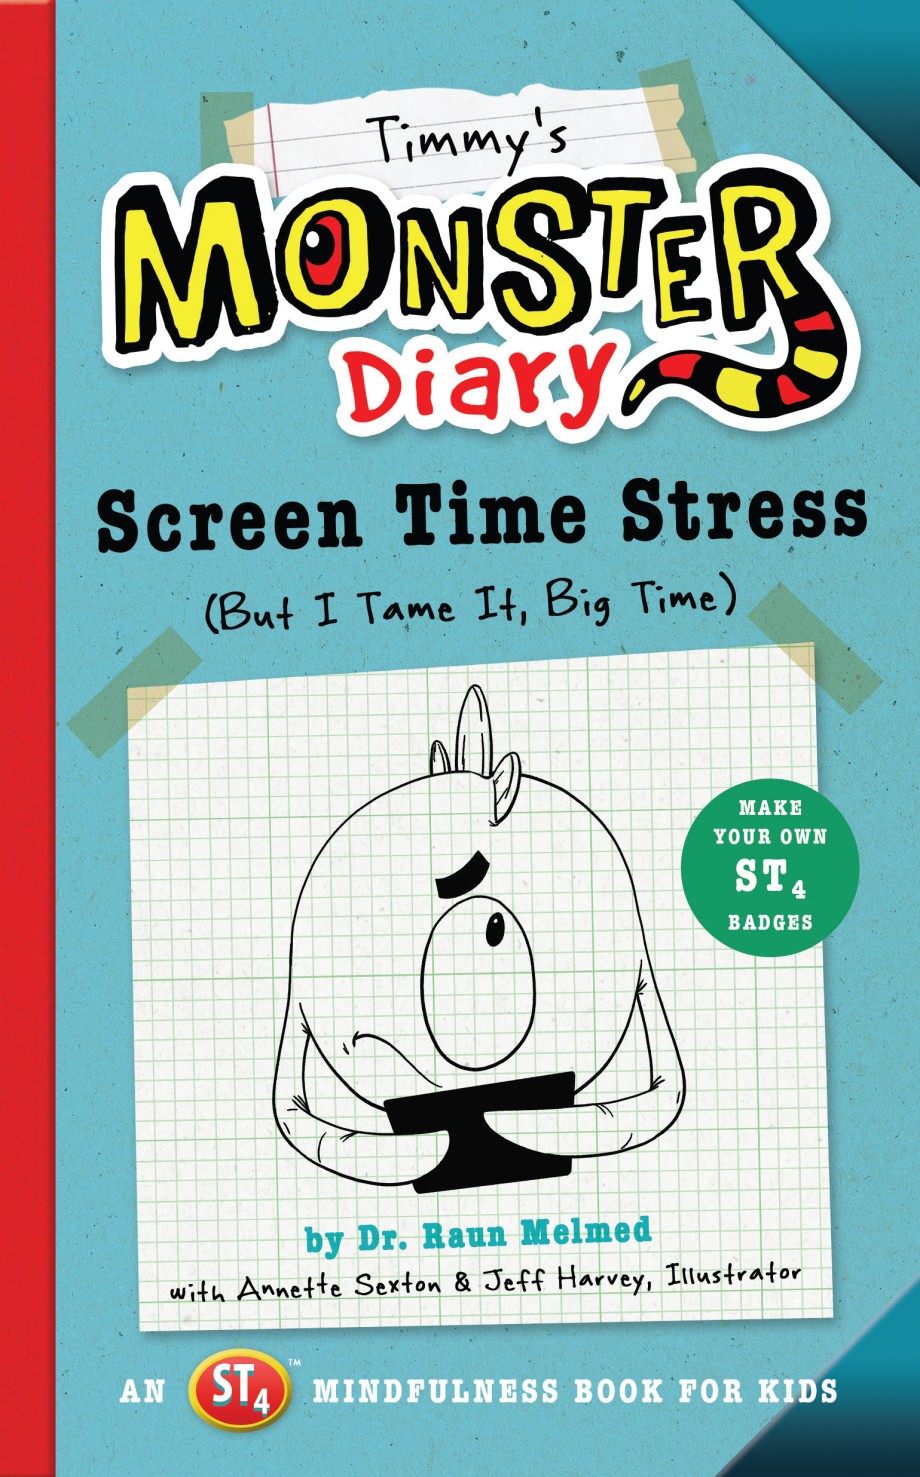 Timmy's Monster Diary Screen Time Stress (But I Tame It, Big Time)